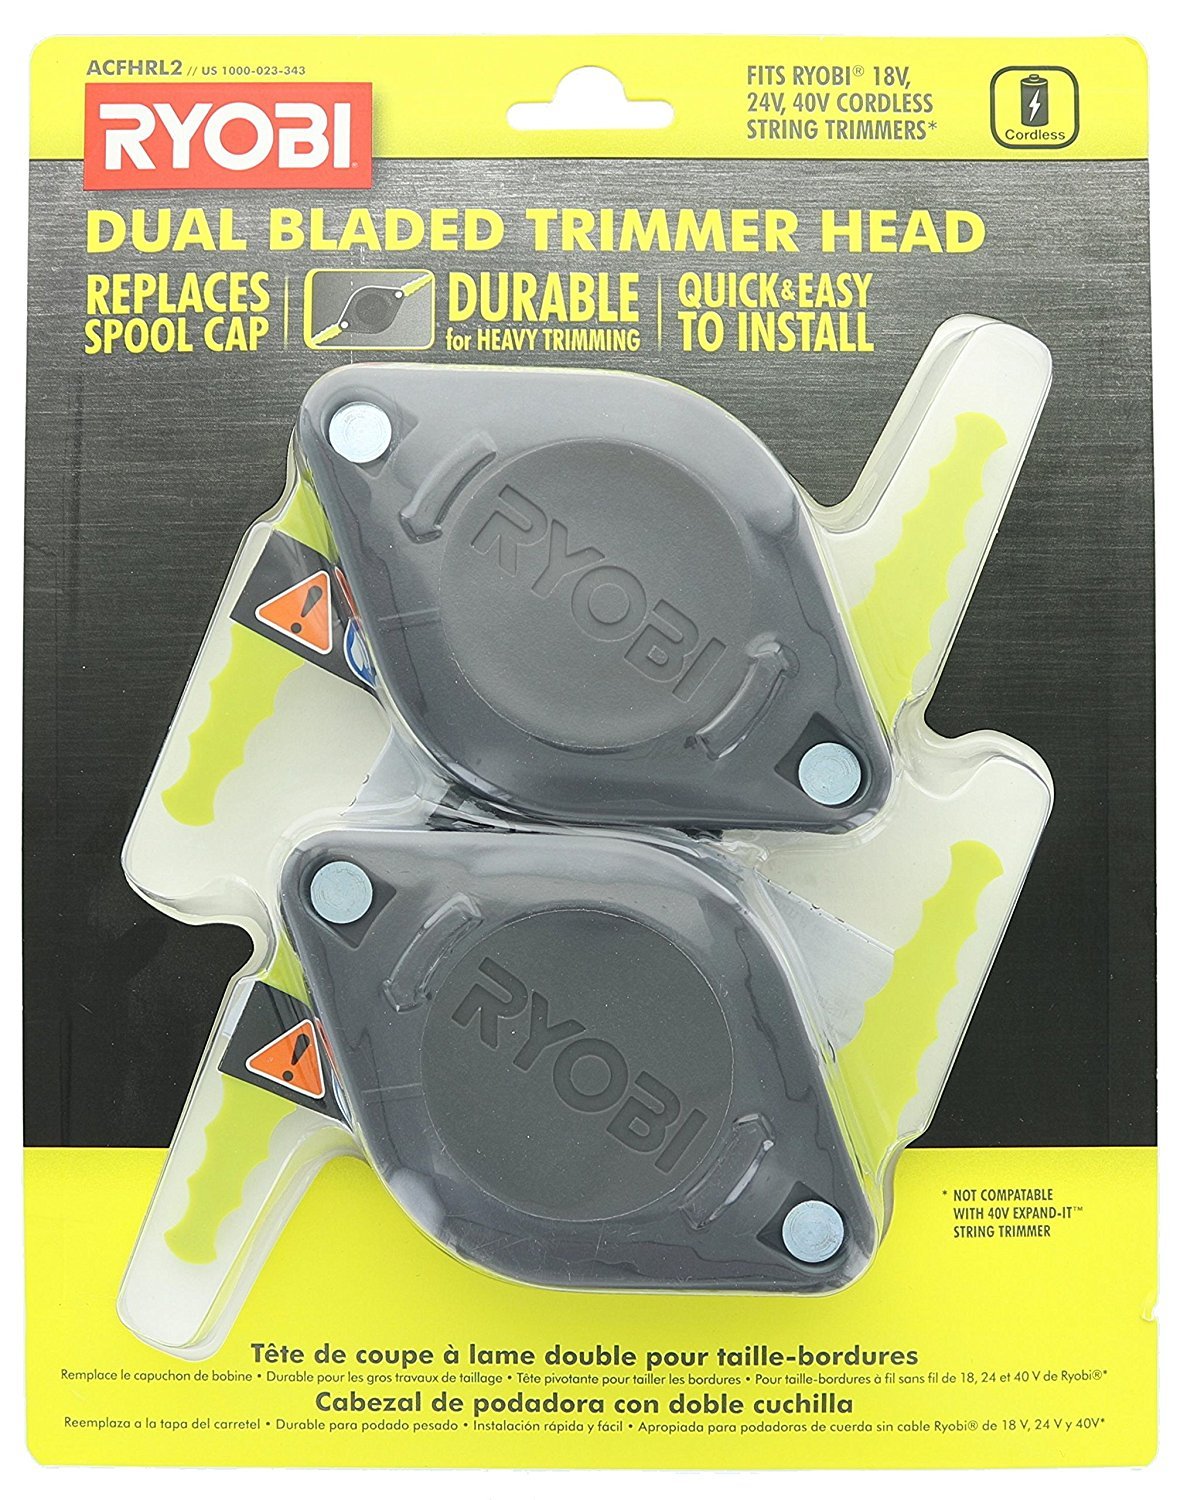 ACFHRL2 Polycarbonate Bladed Trimmer Compatible with Ryobi – teedizy